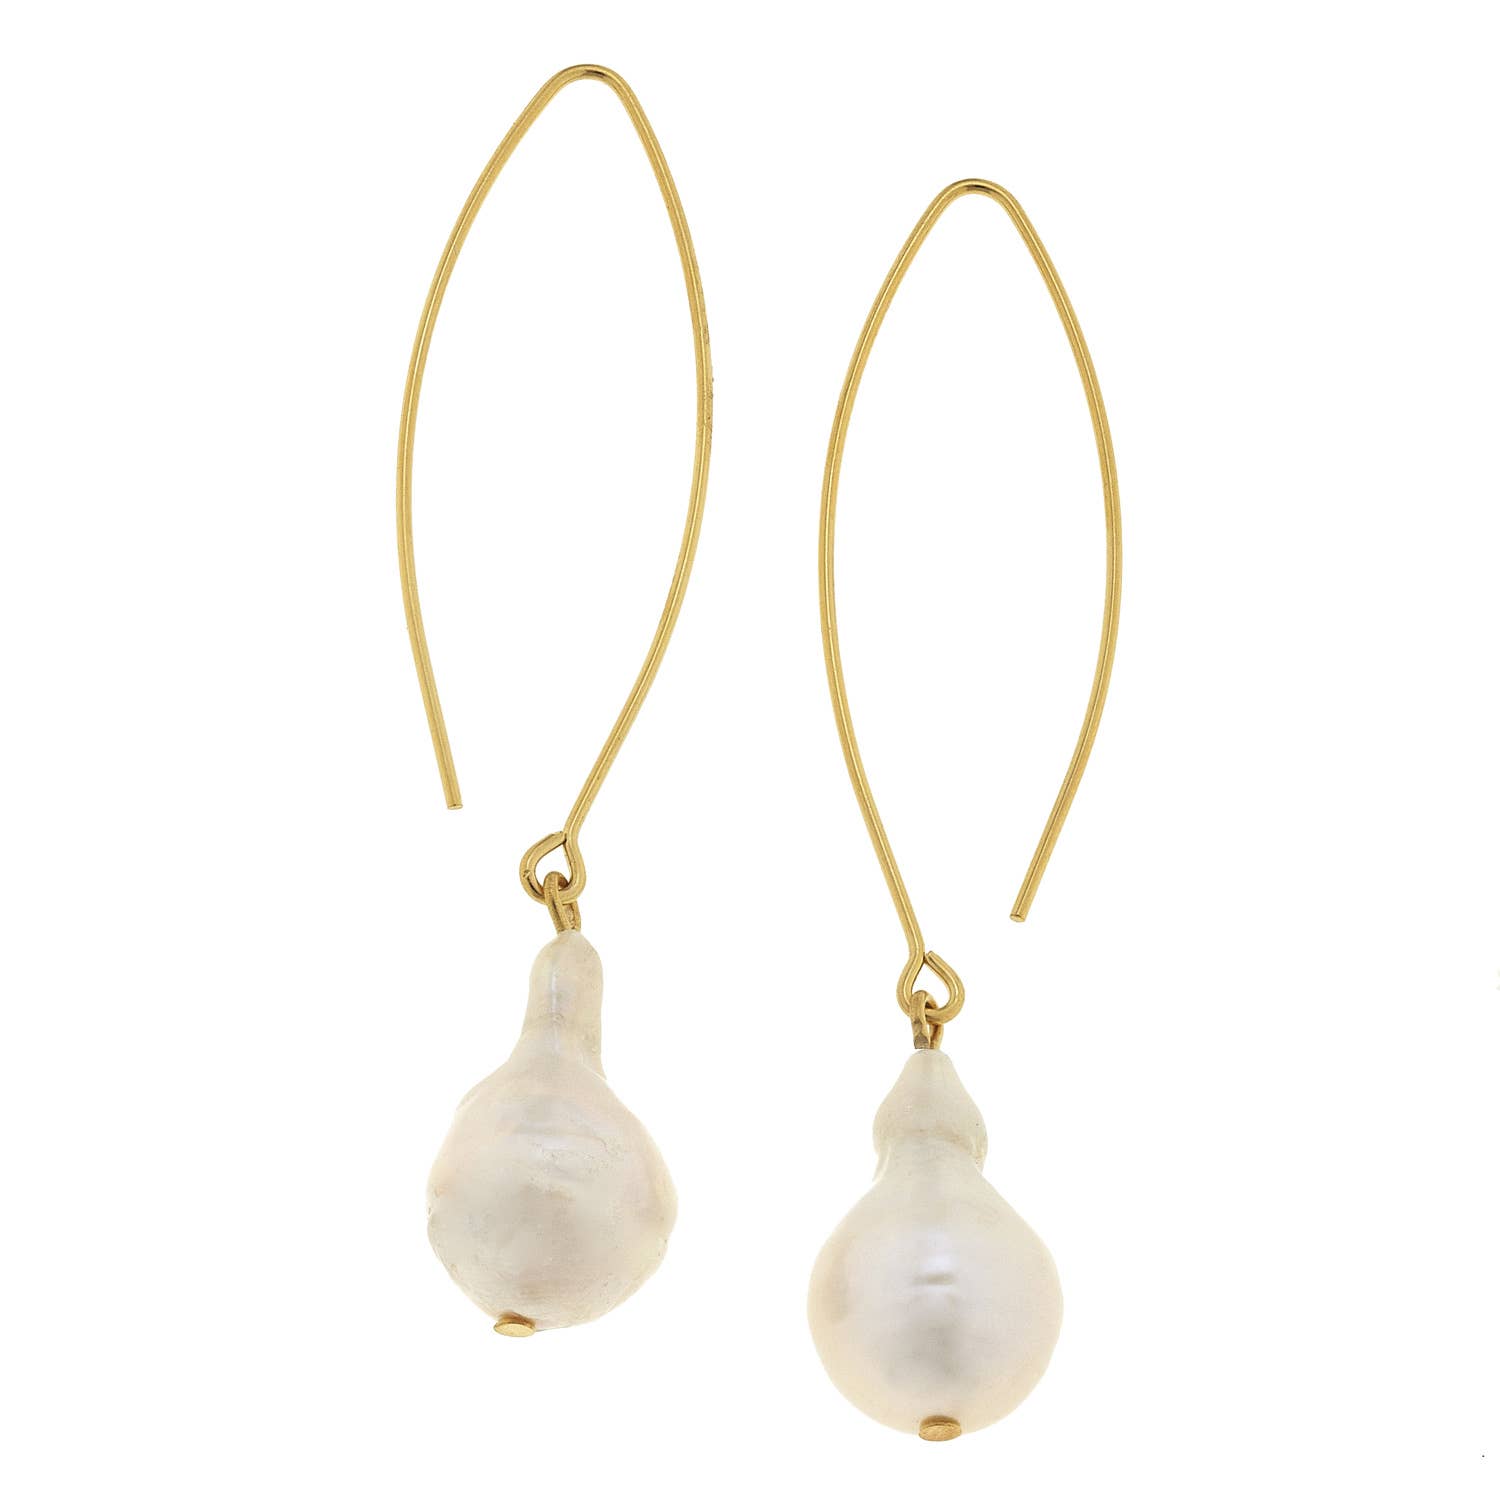 Gold Threader and Genuine Freshwater Baroque Pearl Earrings